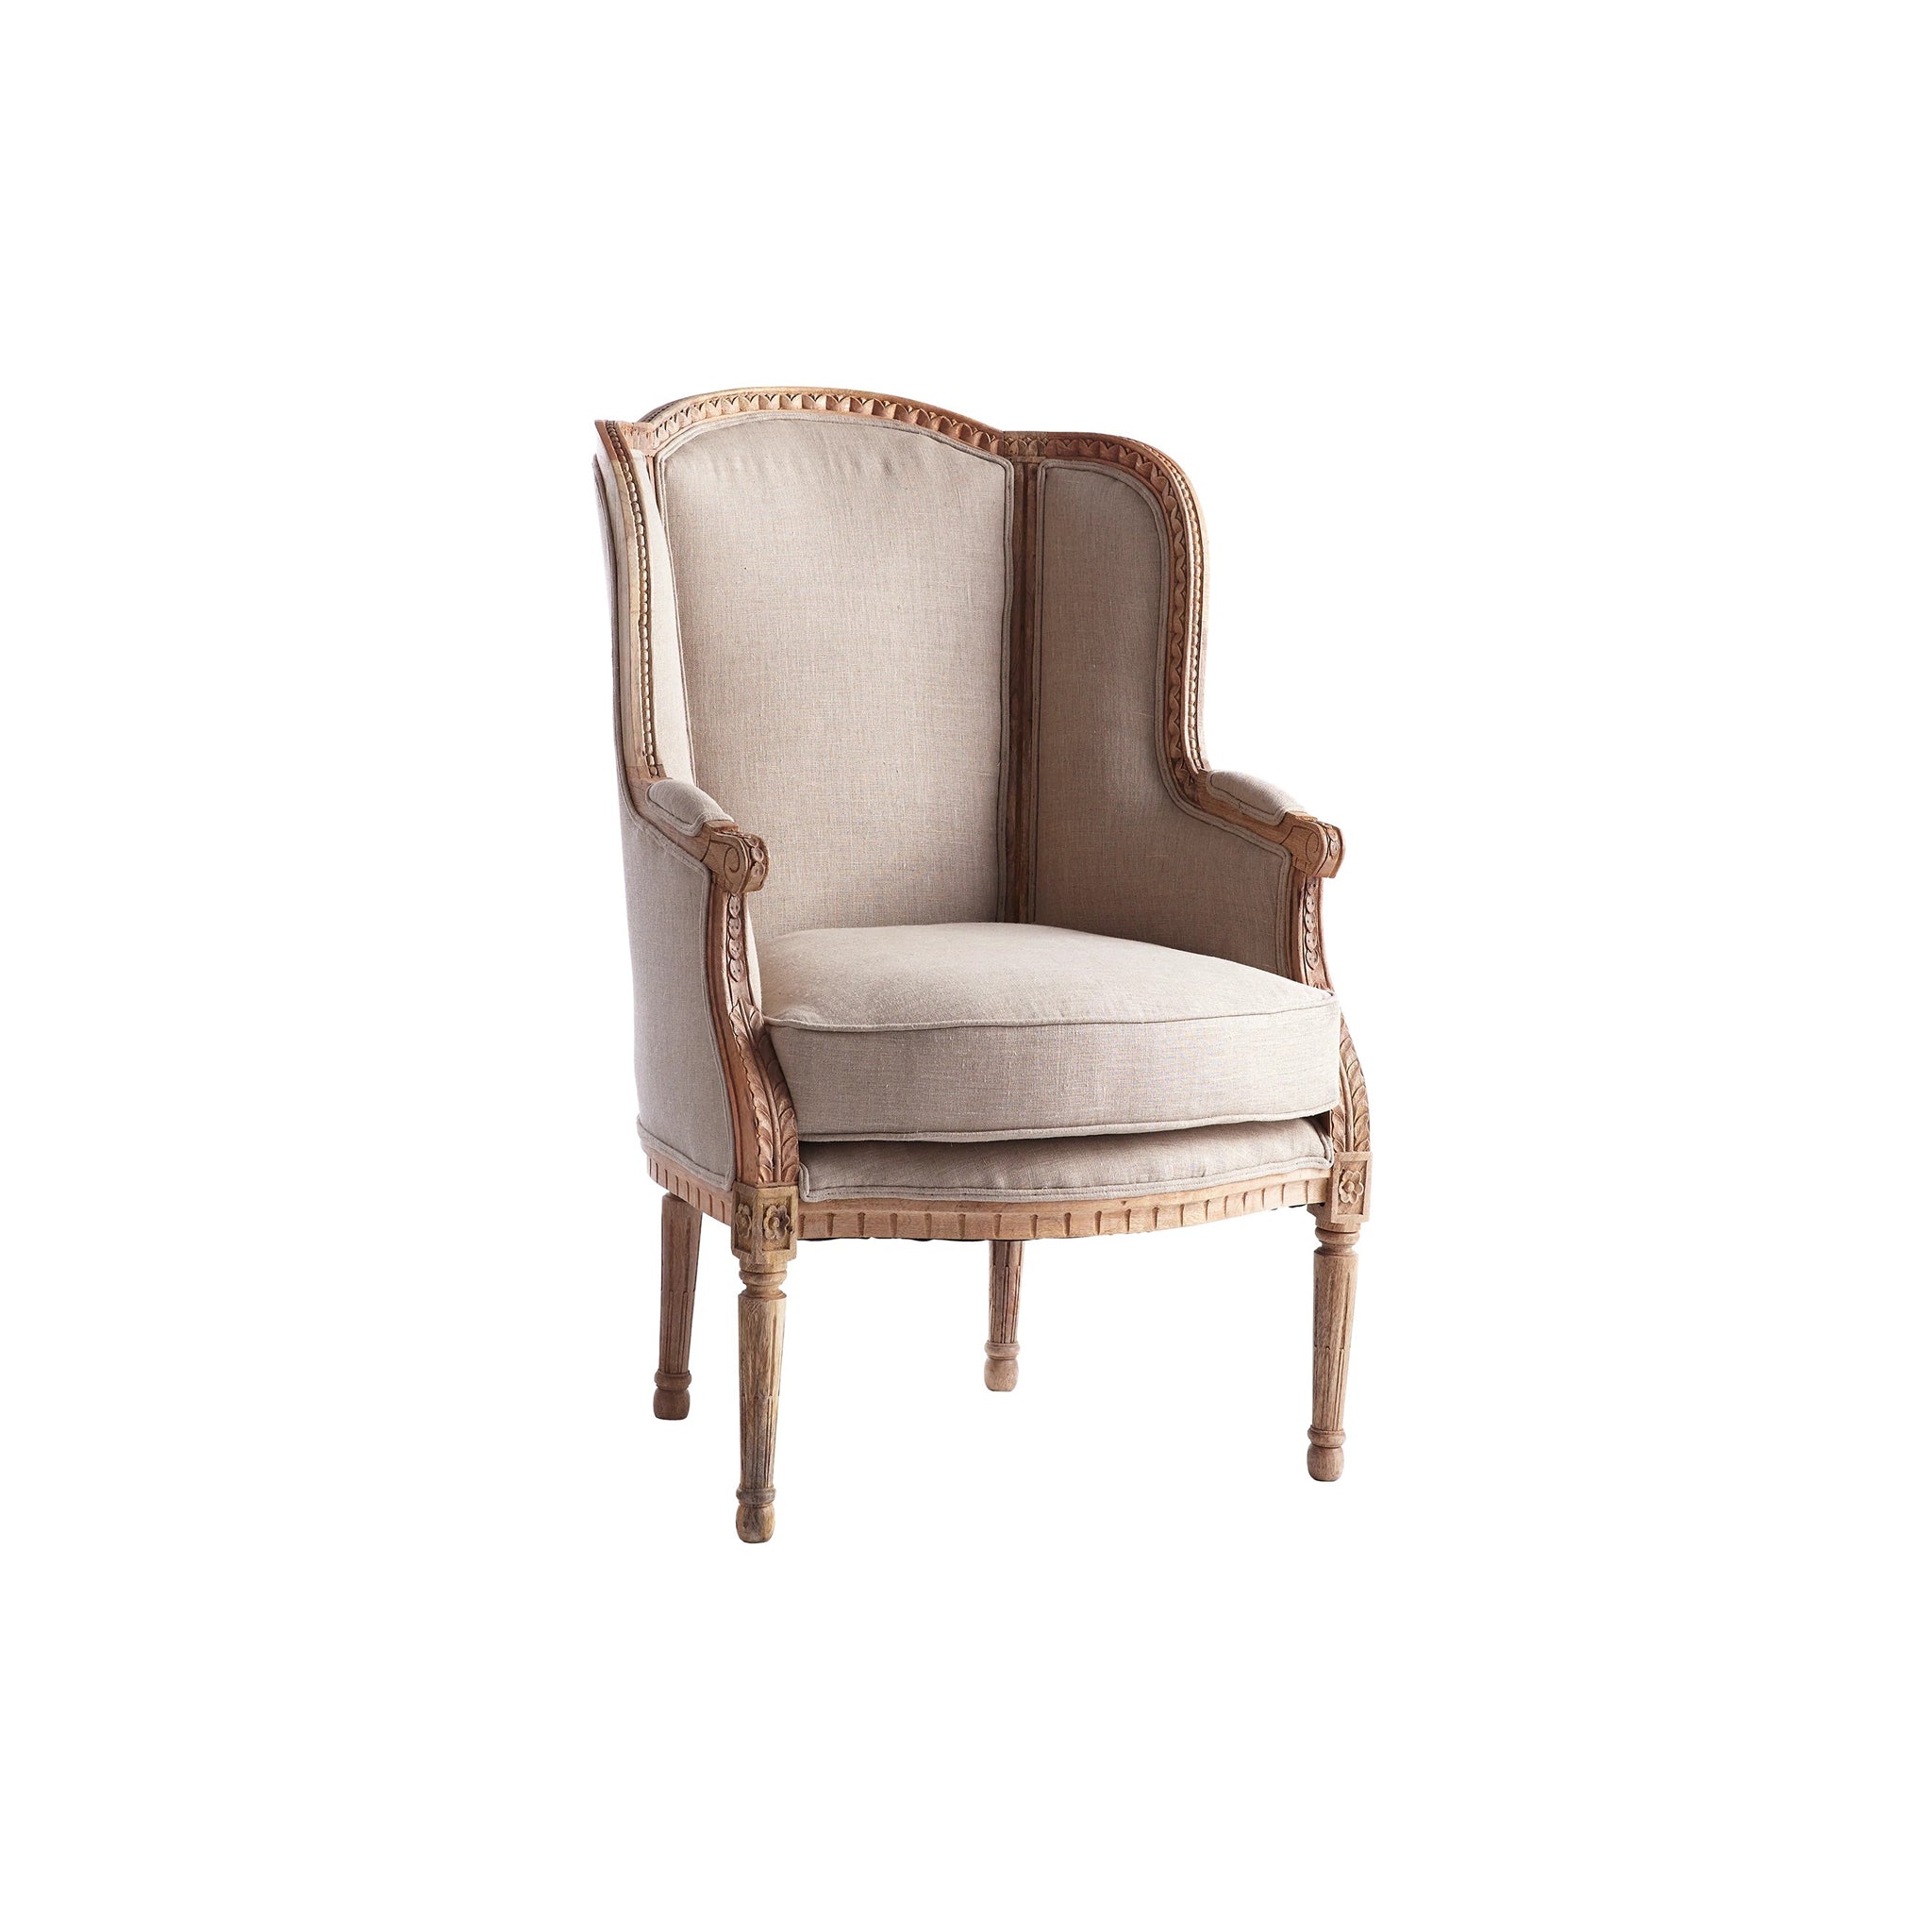 Natural linen Louis XV Wing Chair with a wooden frame